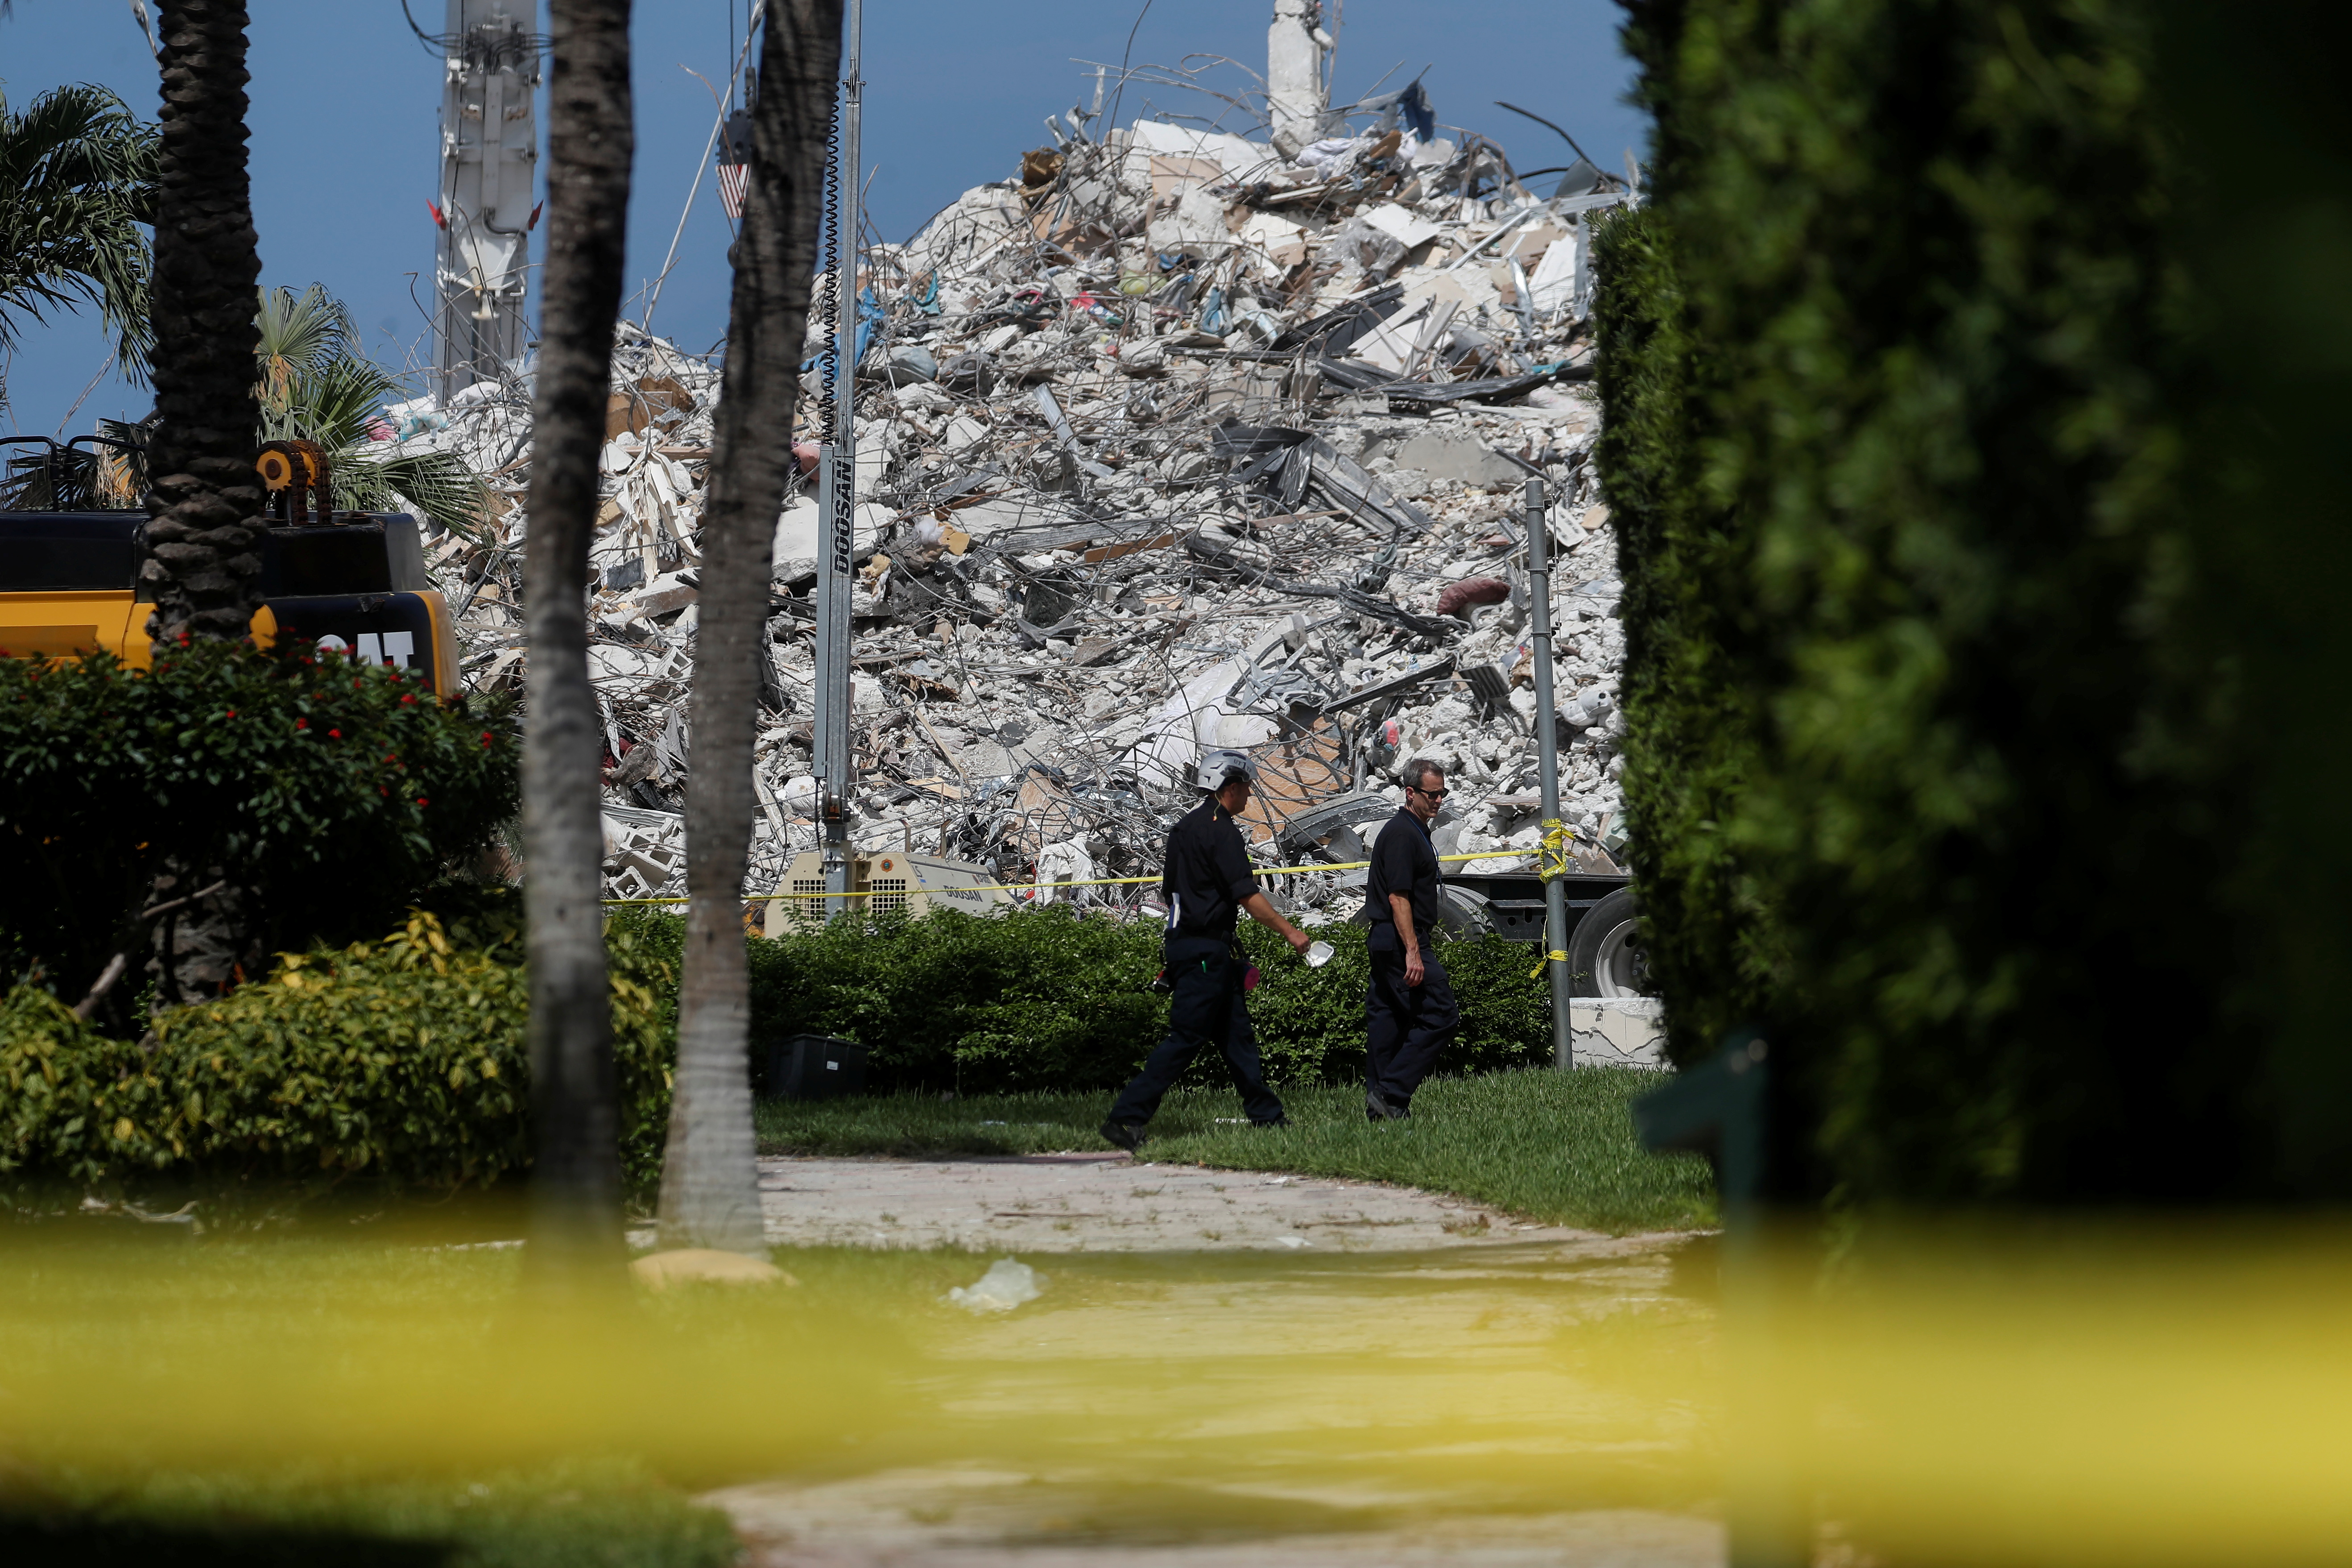 Search teams walk by the remains of the Surfside's Champlain Towers South condominium in Miami, Florida